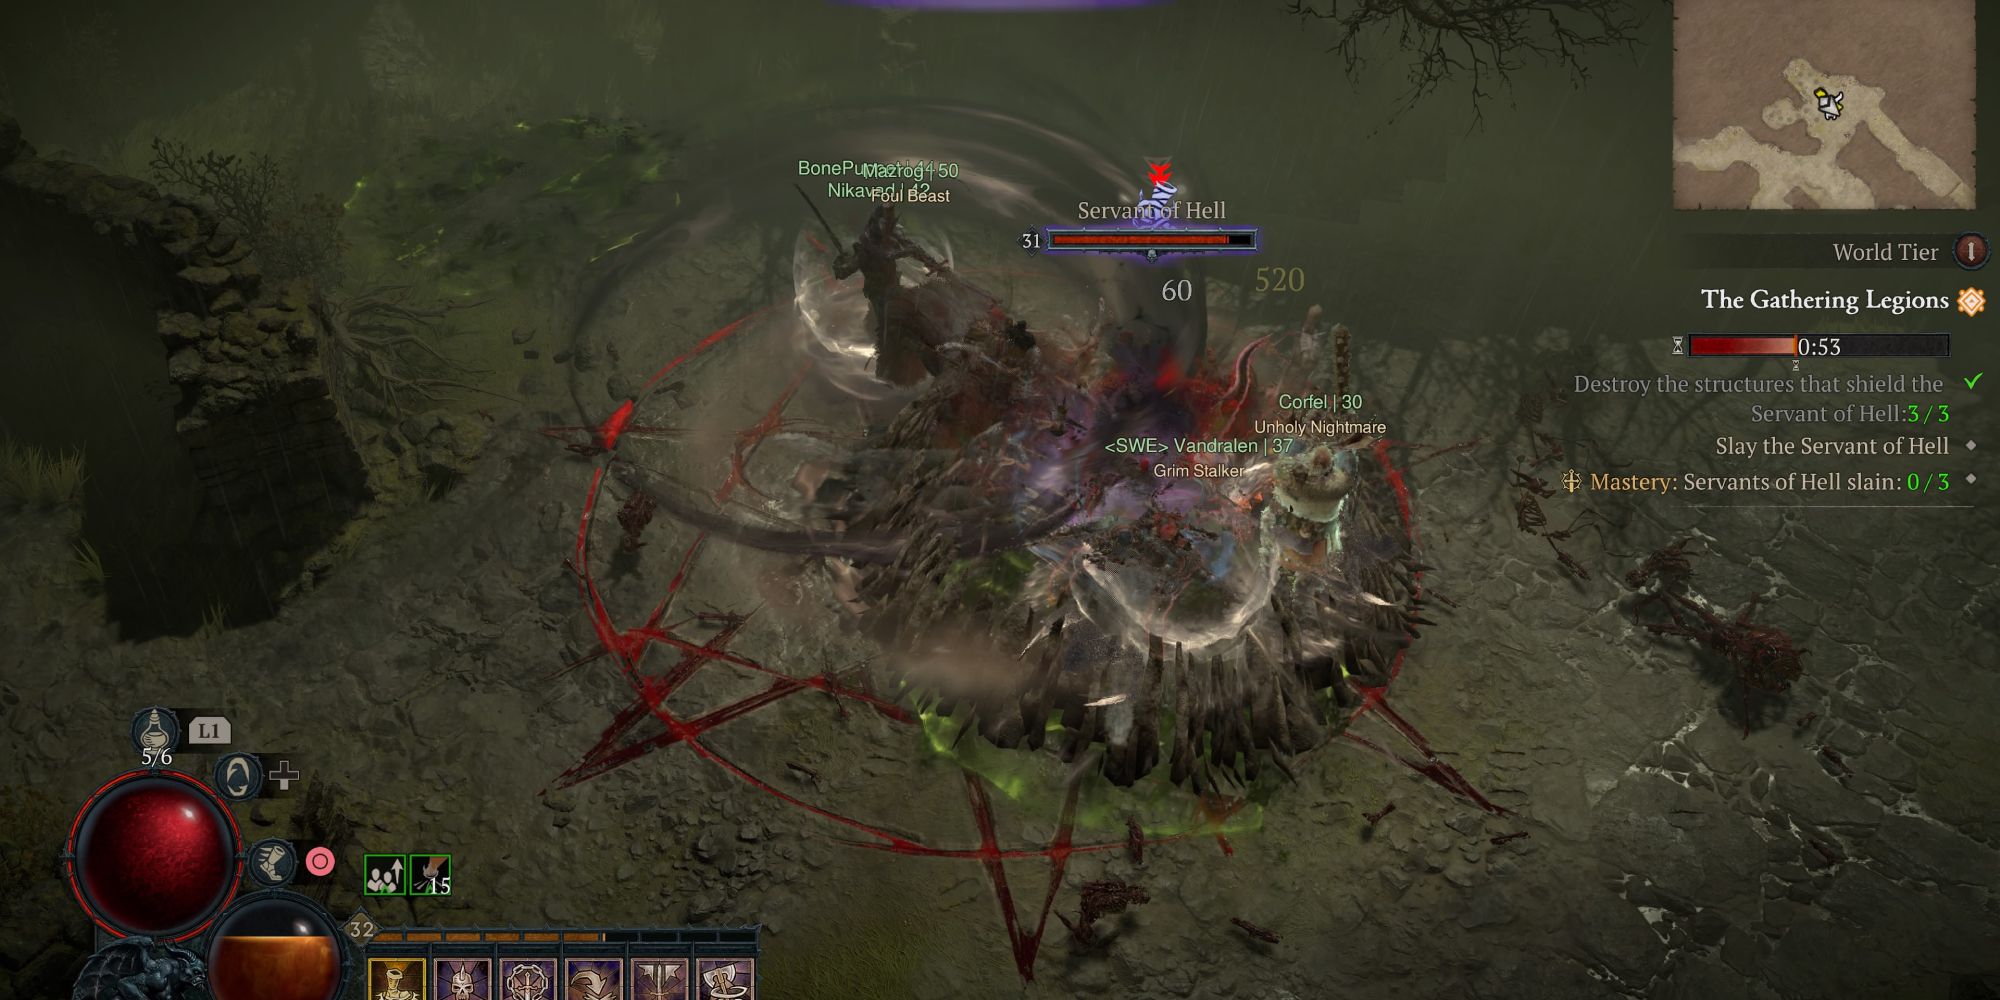 Image has Diablo 4 muliplayer with many players on screen